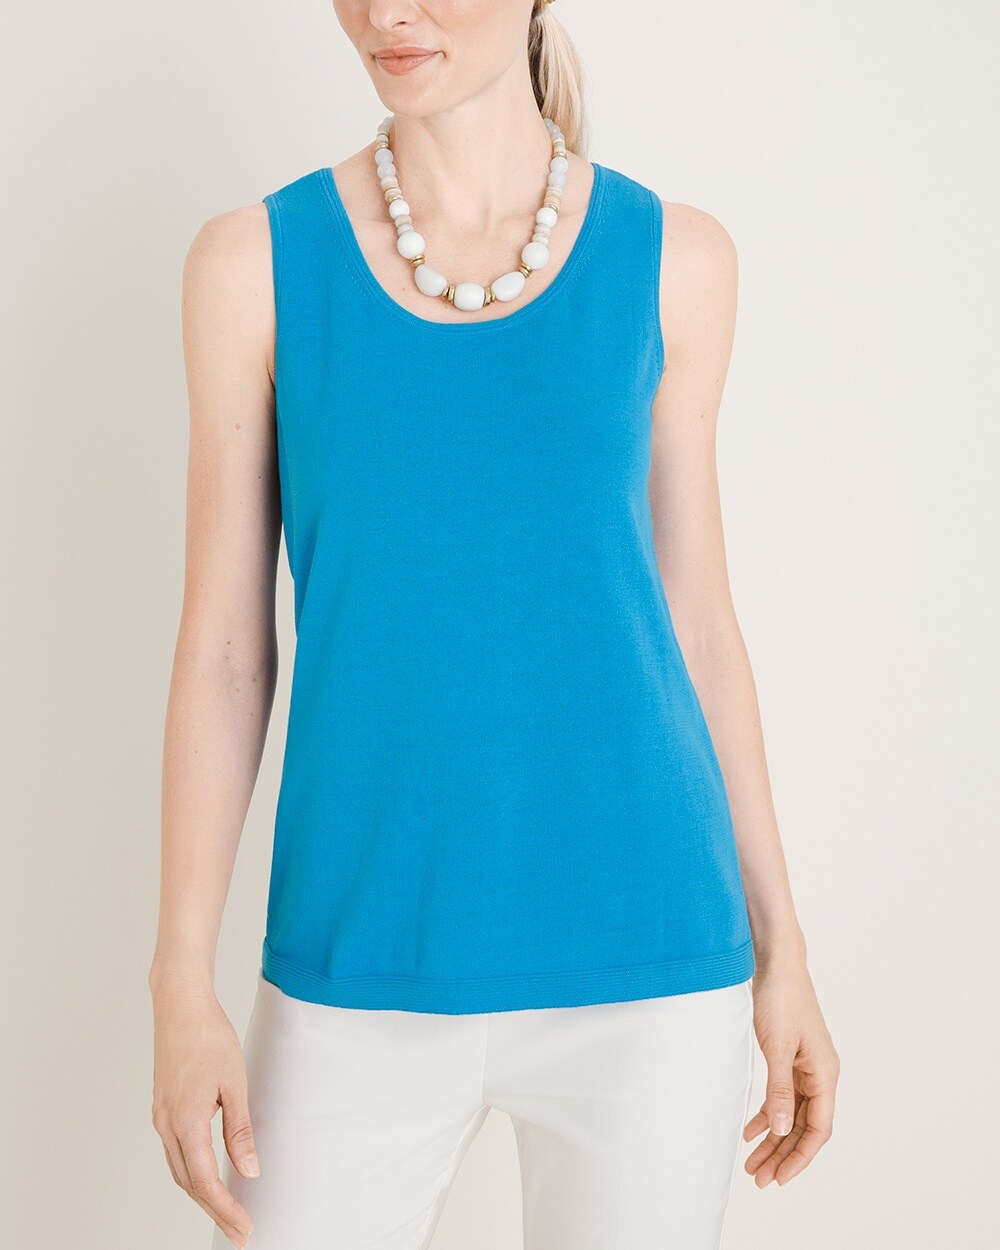 The Everyday Sweater Tank